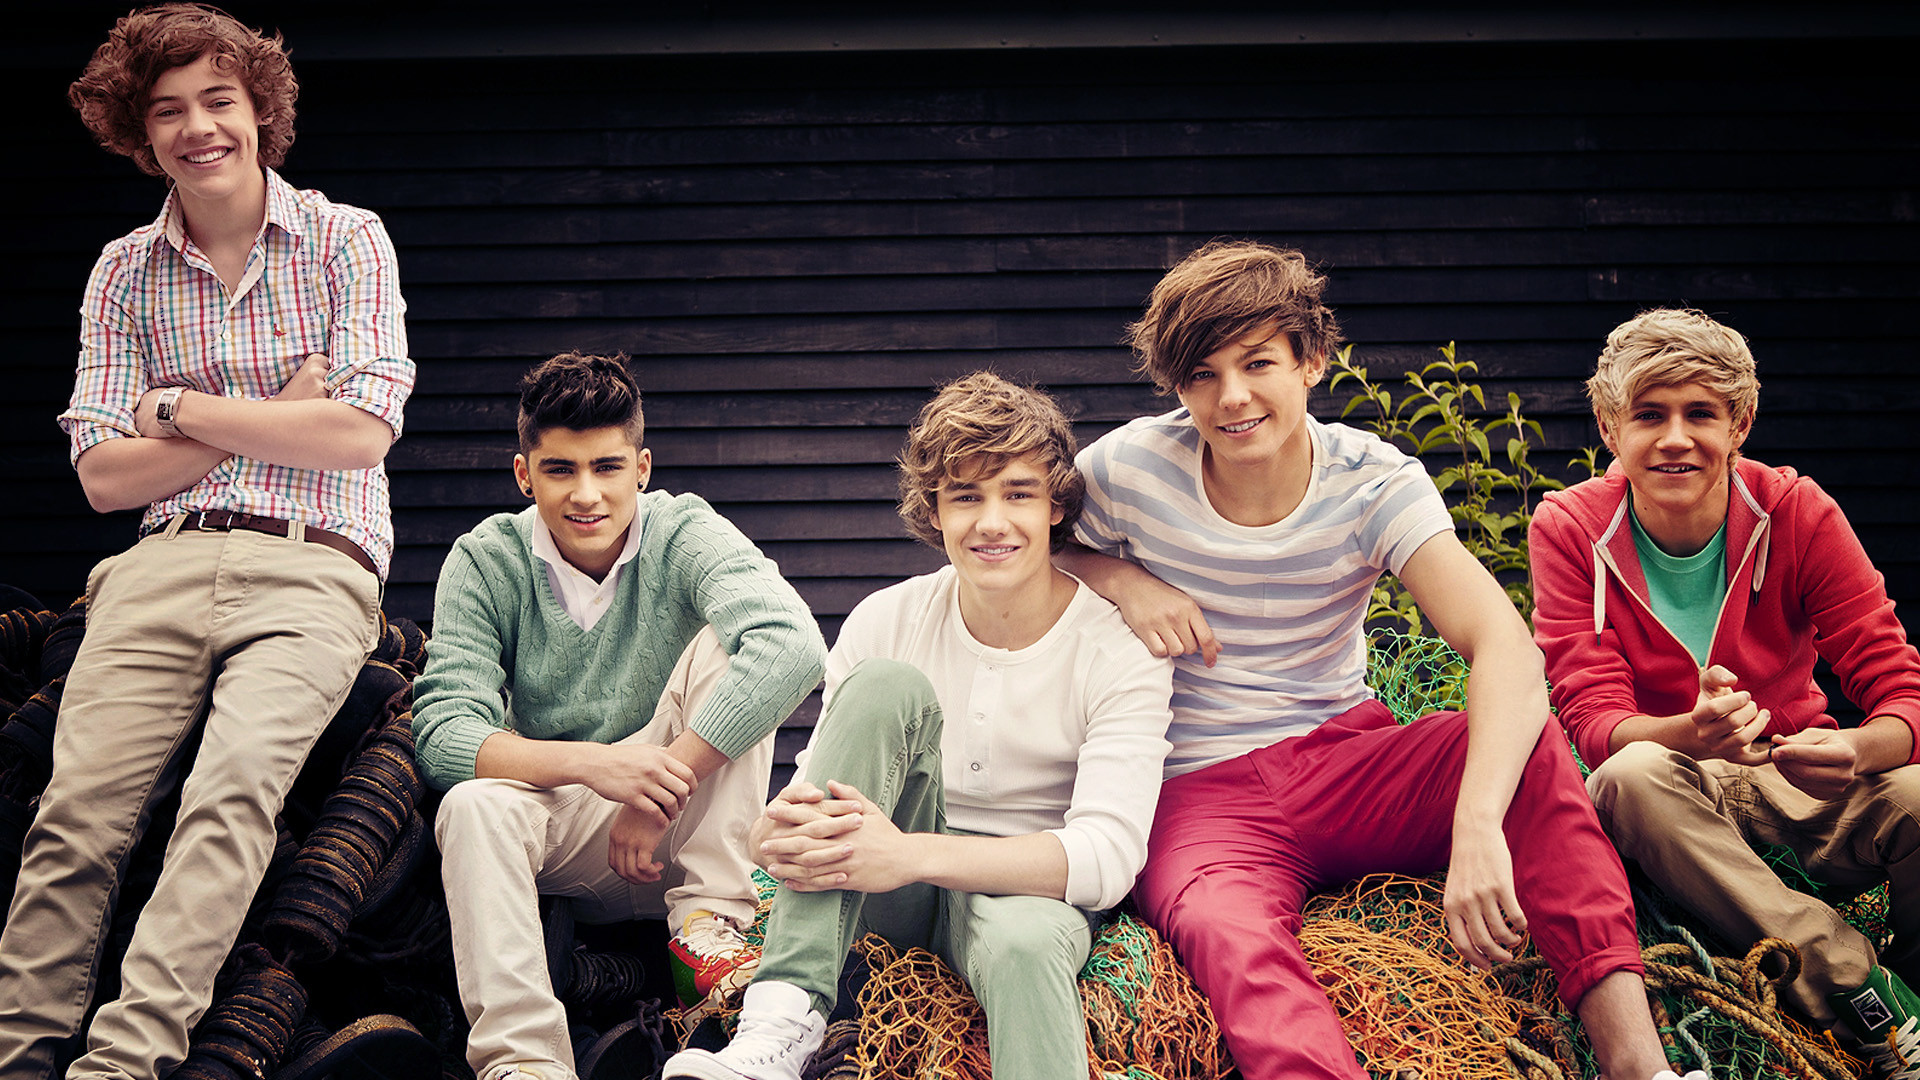 1920x1080 One Direction backdrop wallpaper